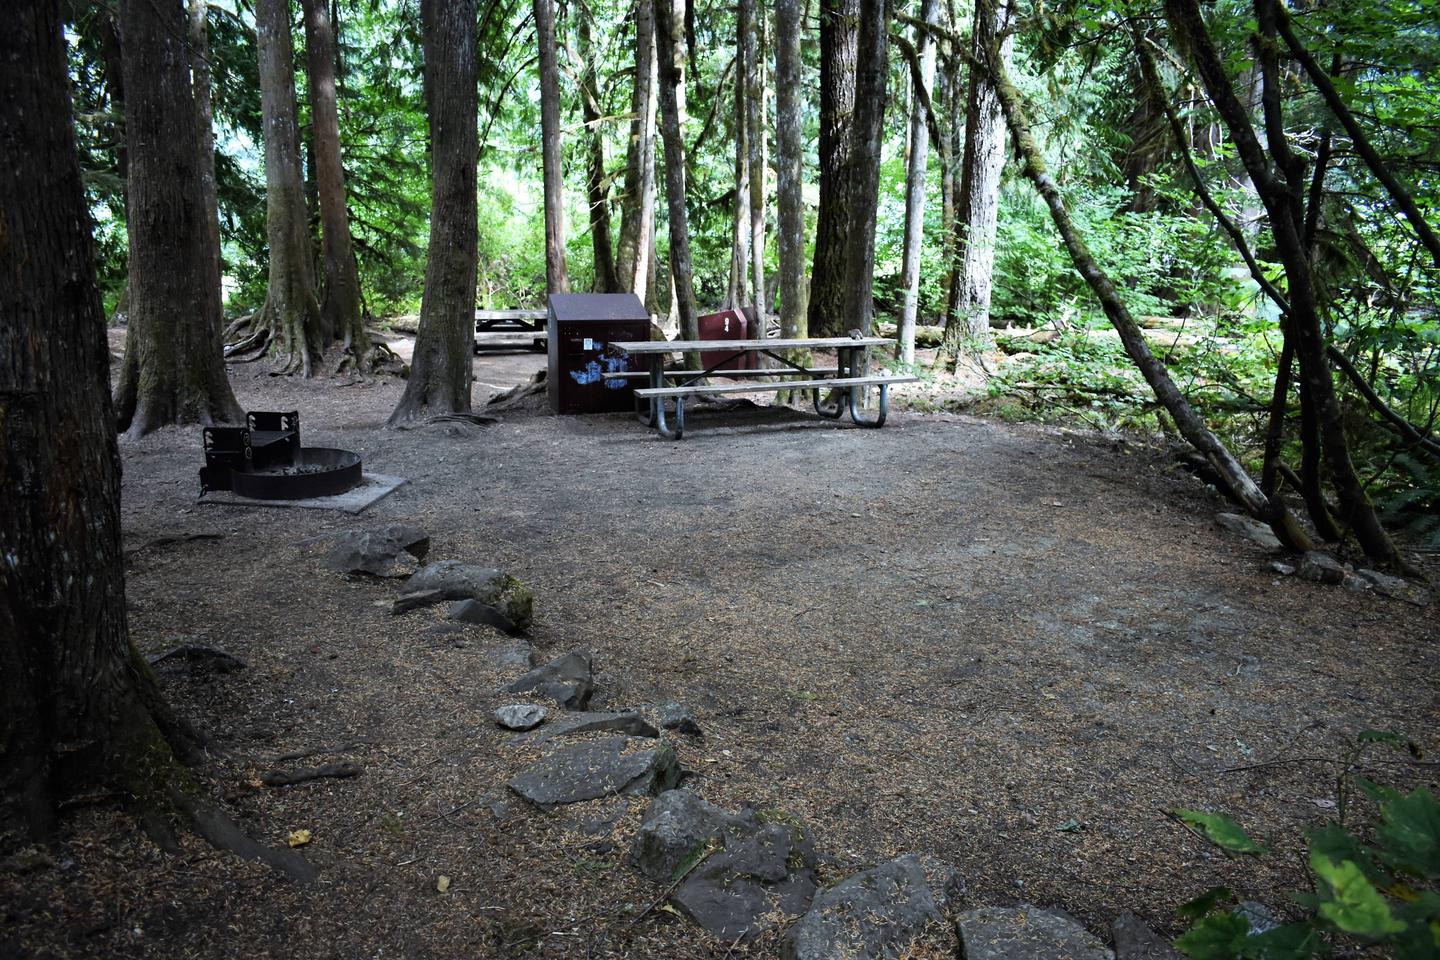 Fire ring, food storage locker, and picnic tableView of campsite